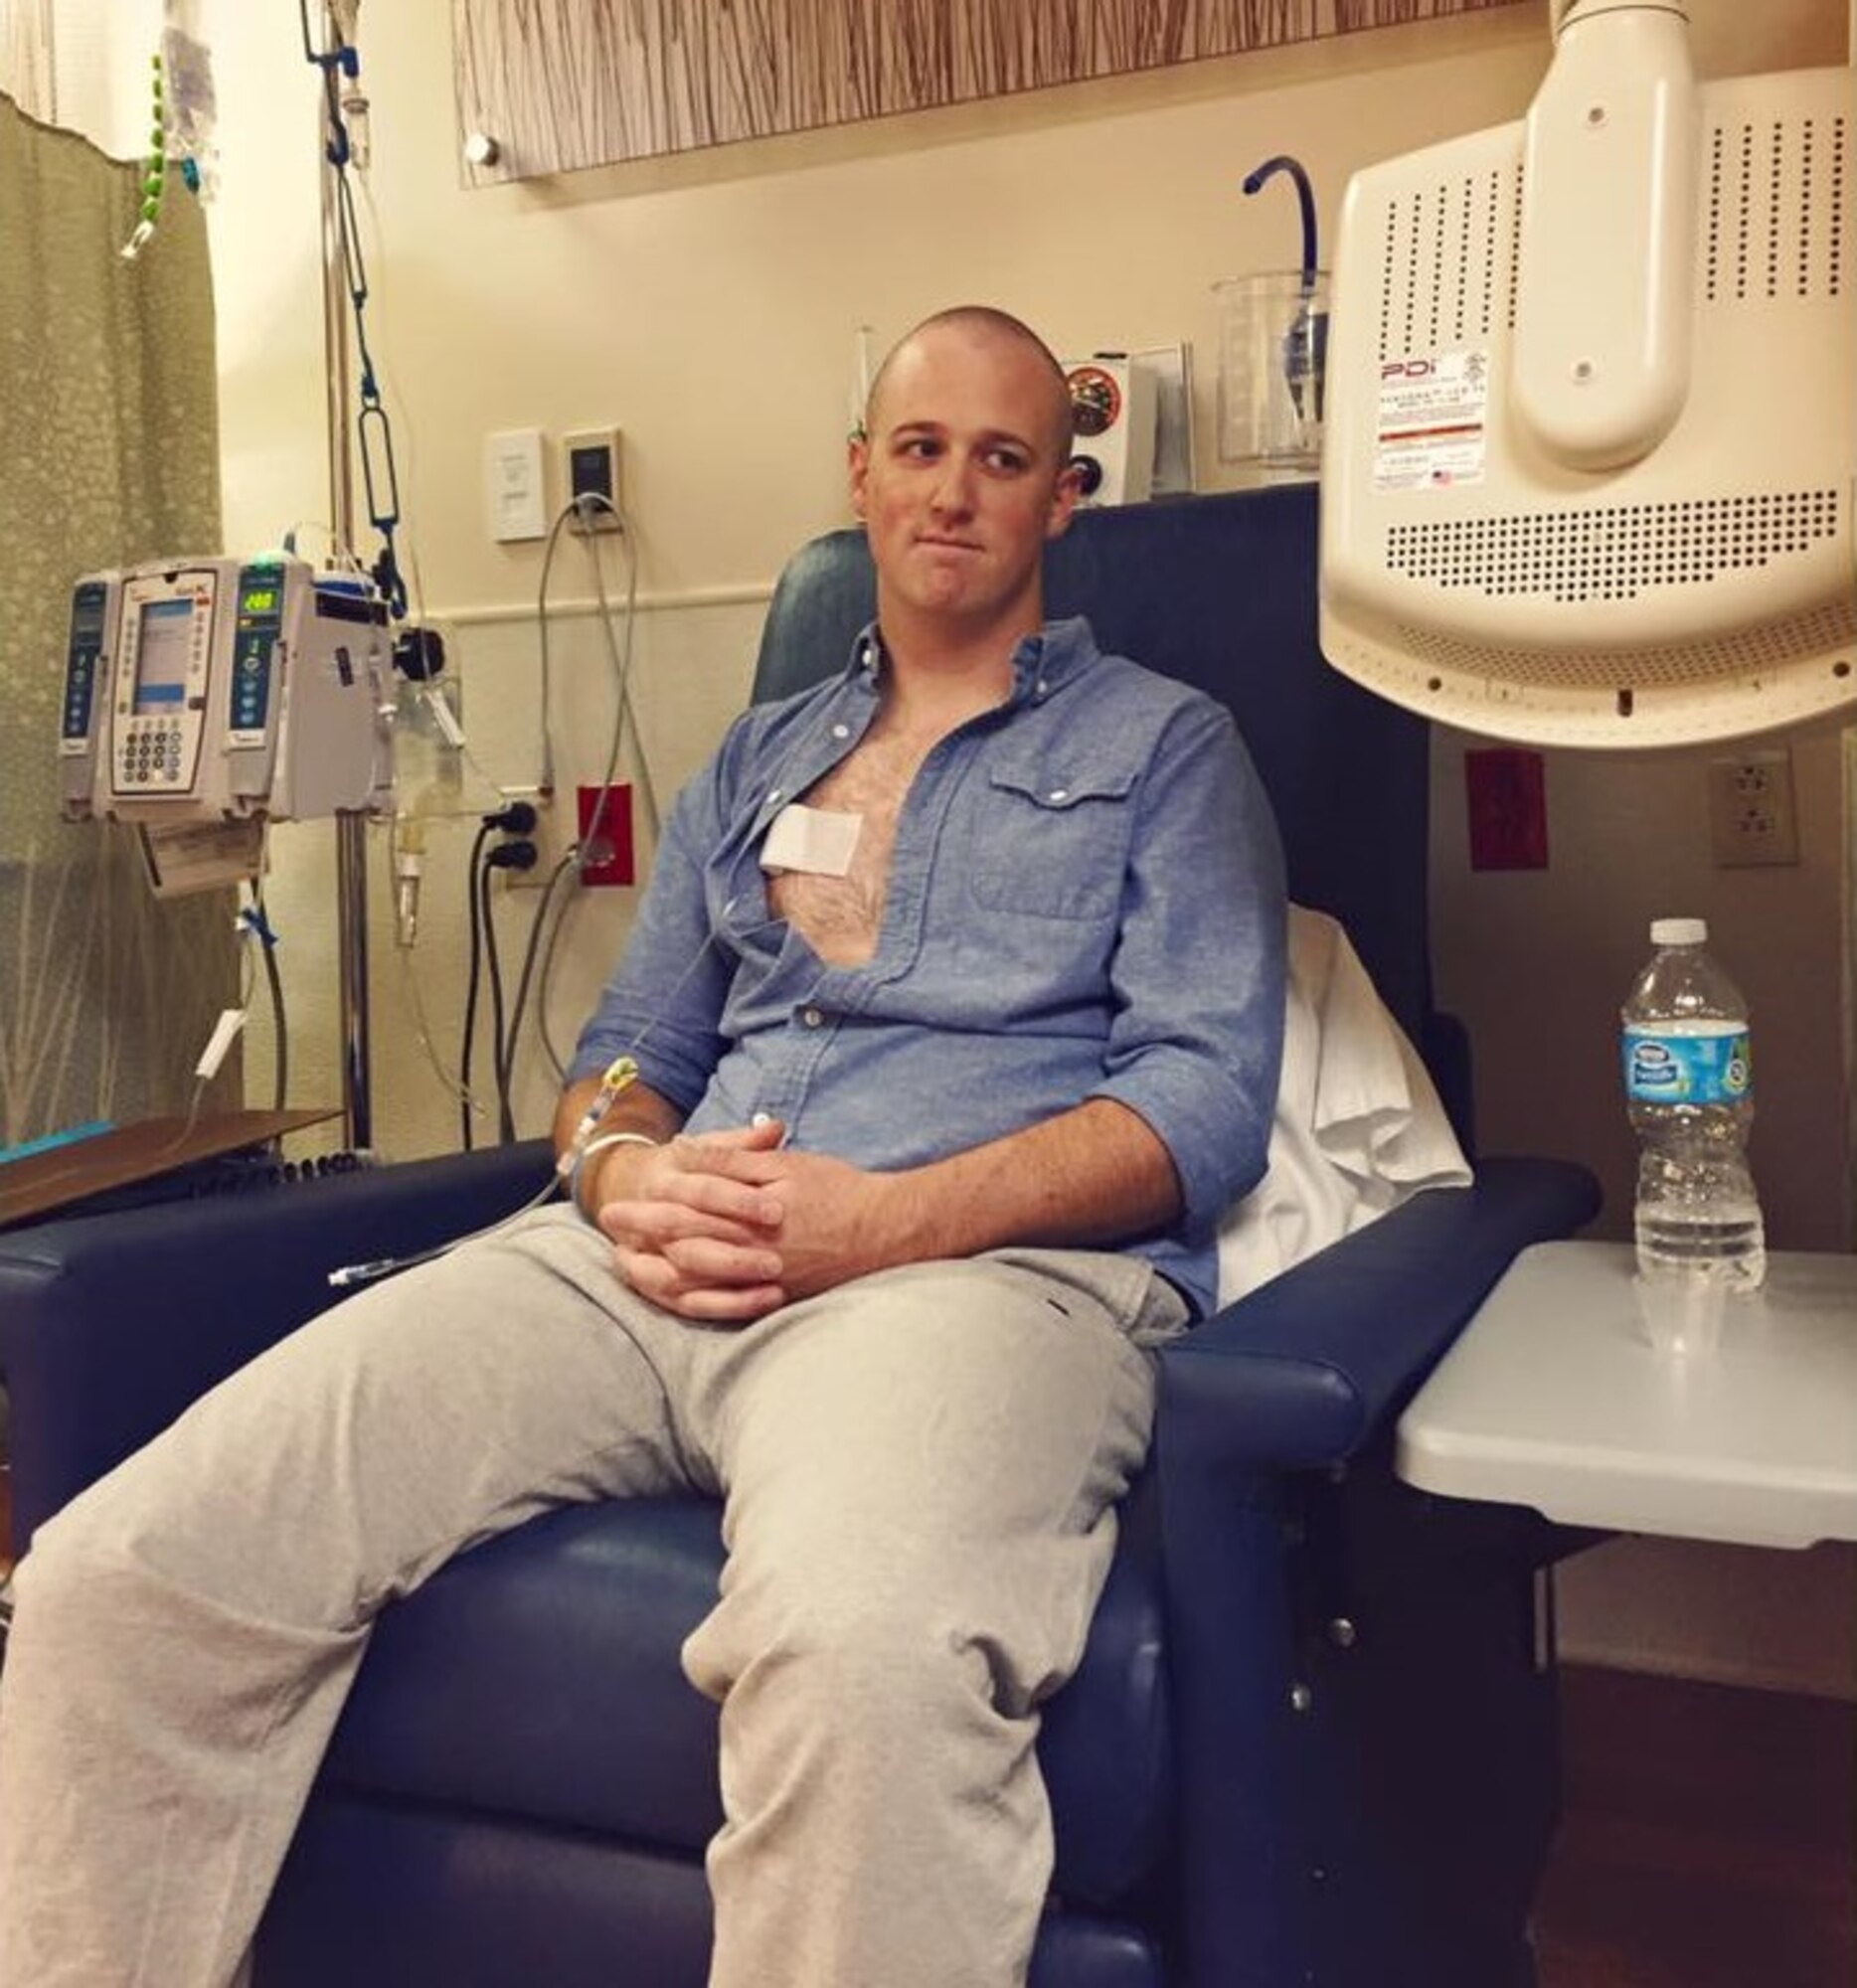 U.S. Air Force Staff Sgt. Oliver Broadbent, 22nd Airlift Squadron loadmaster, undergoes chemotherapy treatment in David Grant USAF Medical Center at Travis Air Force Base, Calif. Broadbent was diagnosed with stage 1 Follicular non-Hodgkin lymphoma in June 2015. After six months of chemotherapy and radiation treatment, Broadbent was pronounced cancer free. (Courtesy photo)  